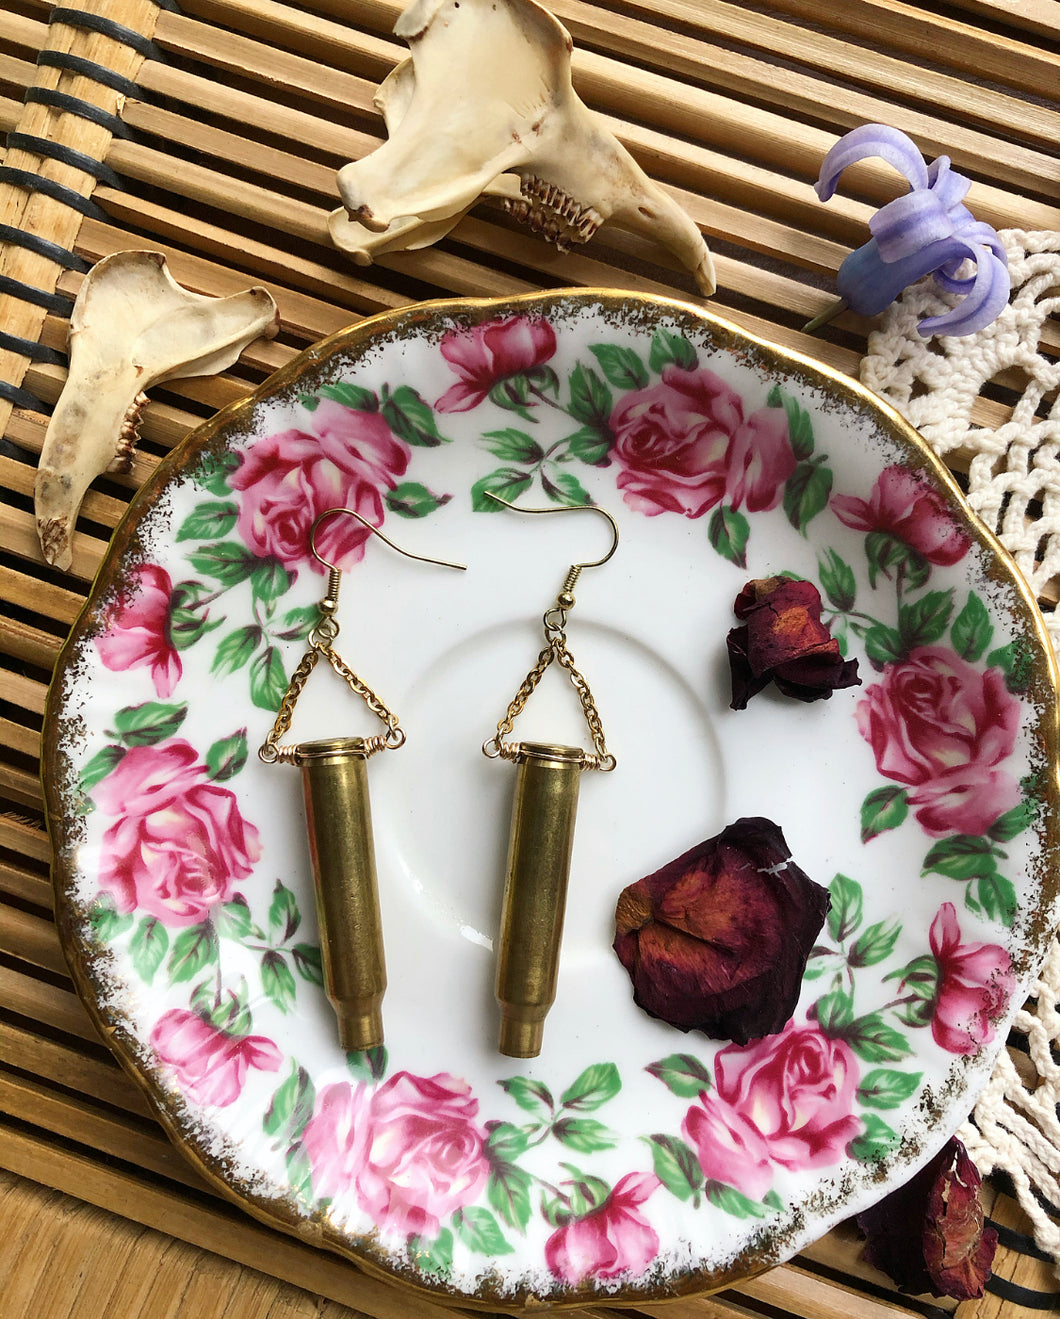 Golden brass bullet shell earrings lay on floral print plate with rose pedals and lace.